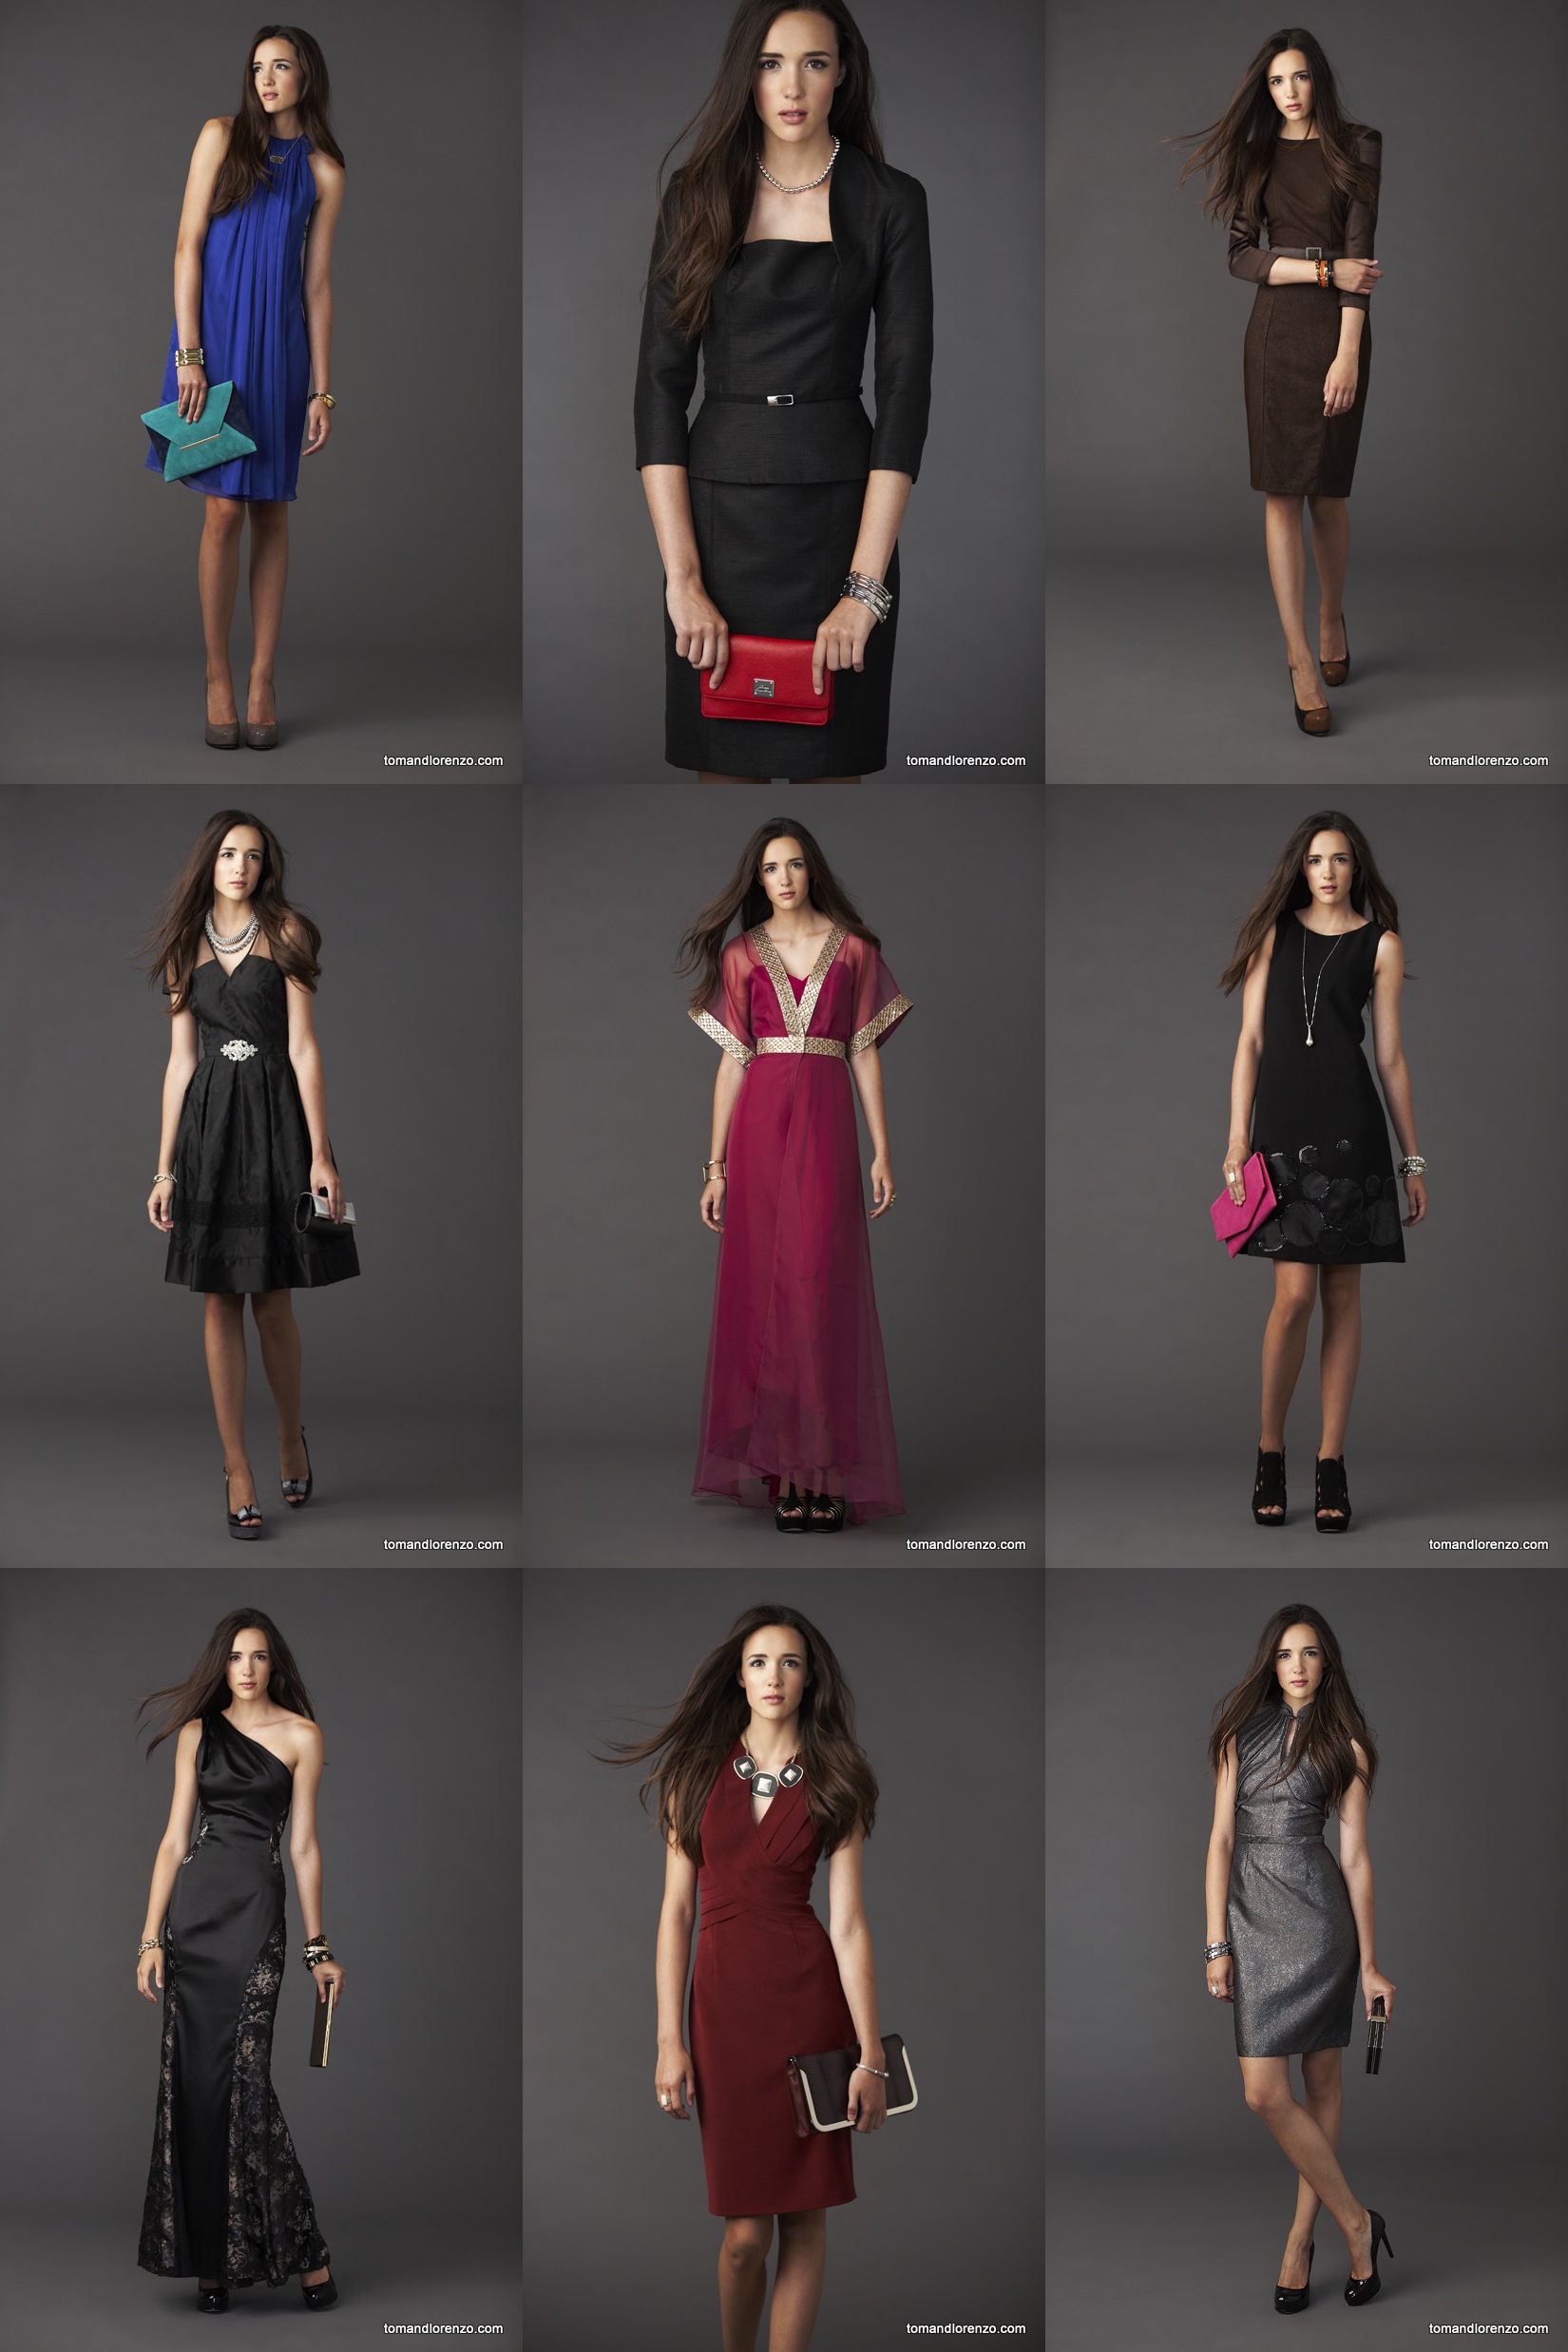 lord 7 taylor dresses